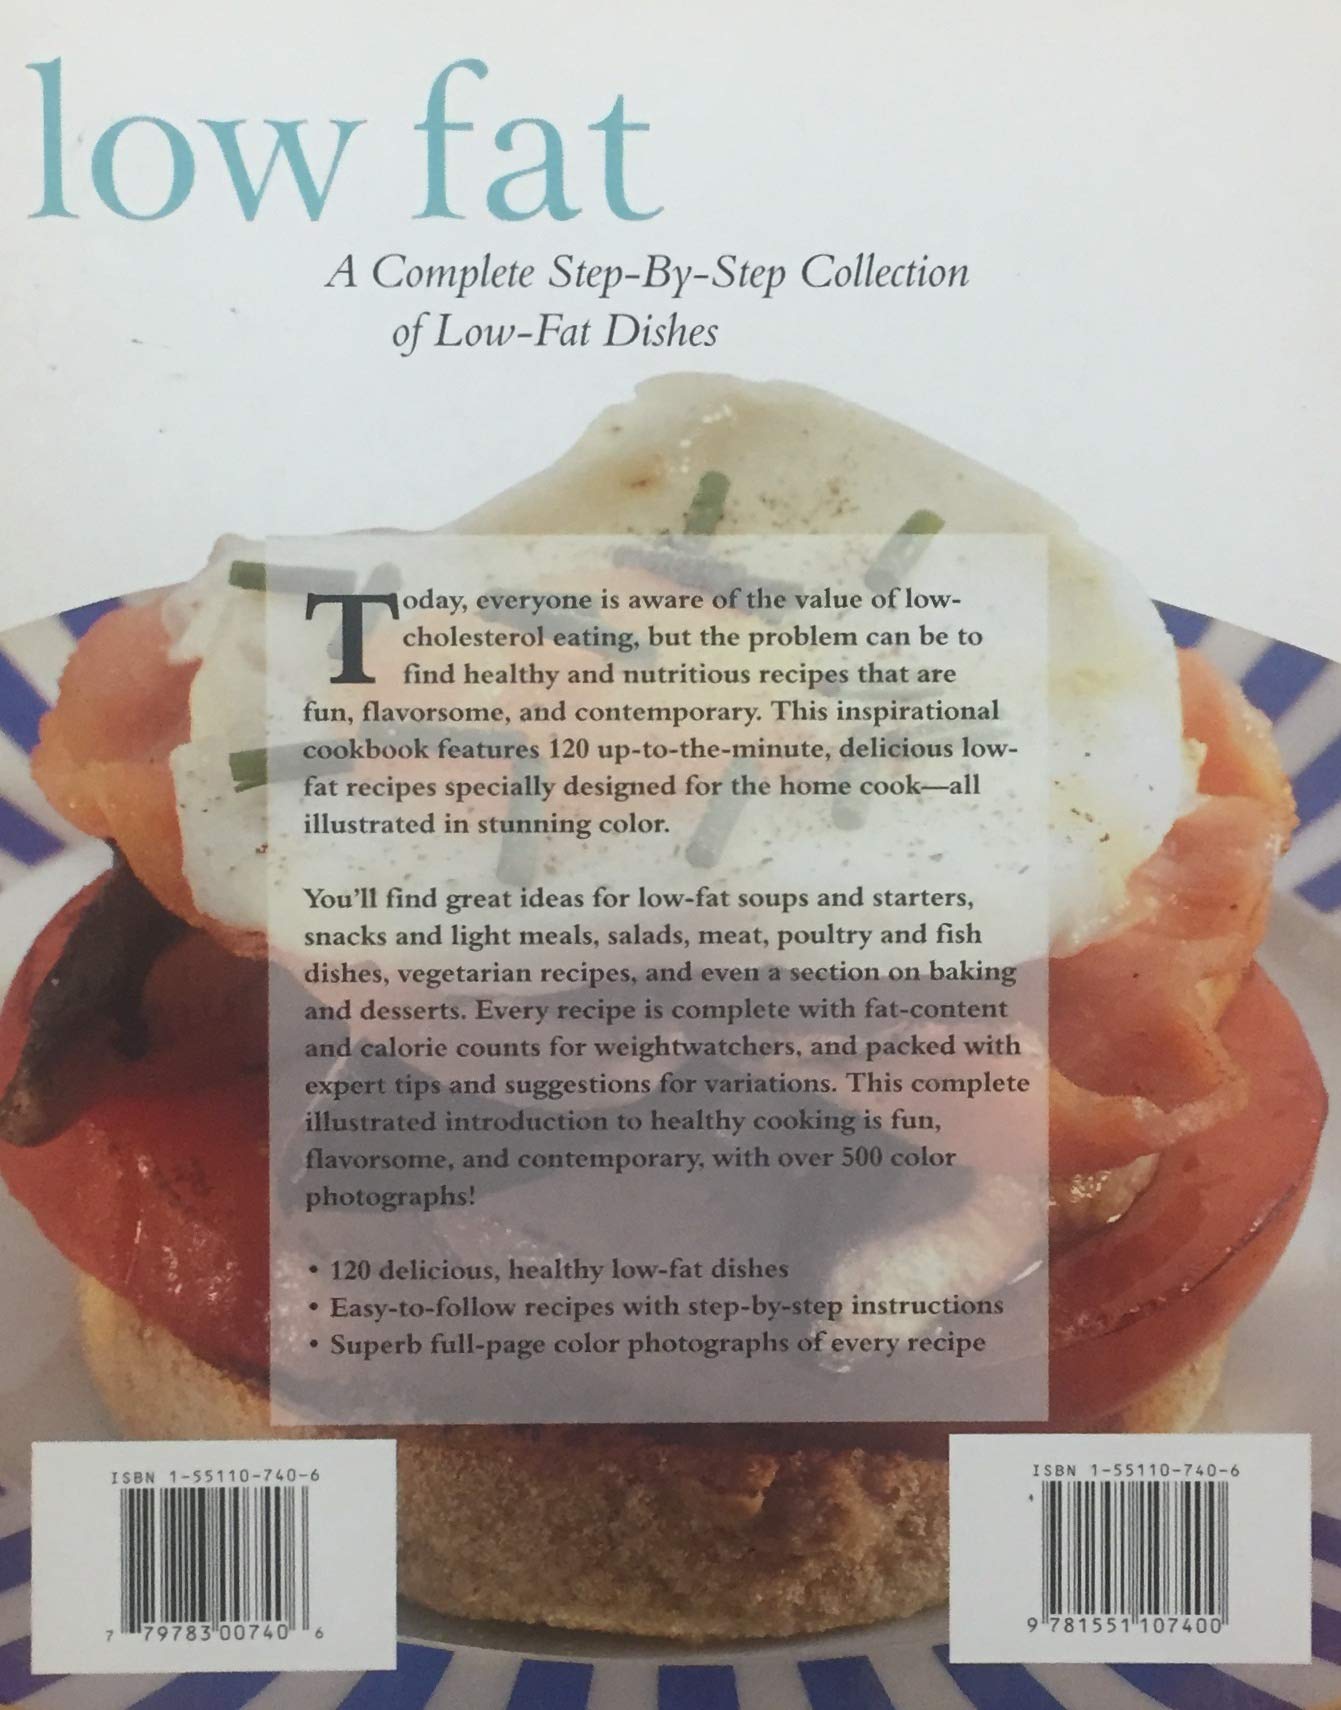 What's Cooking: Low Fat (Kathryn Hawkins)